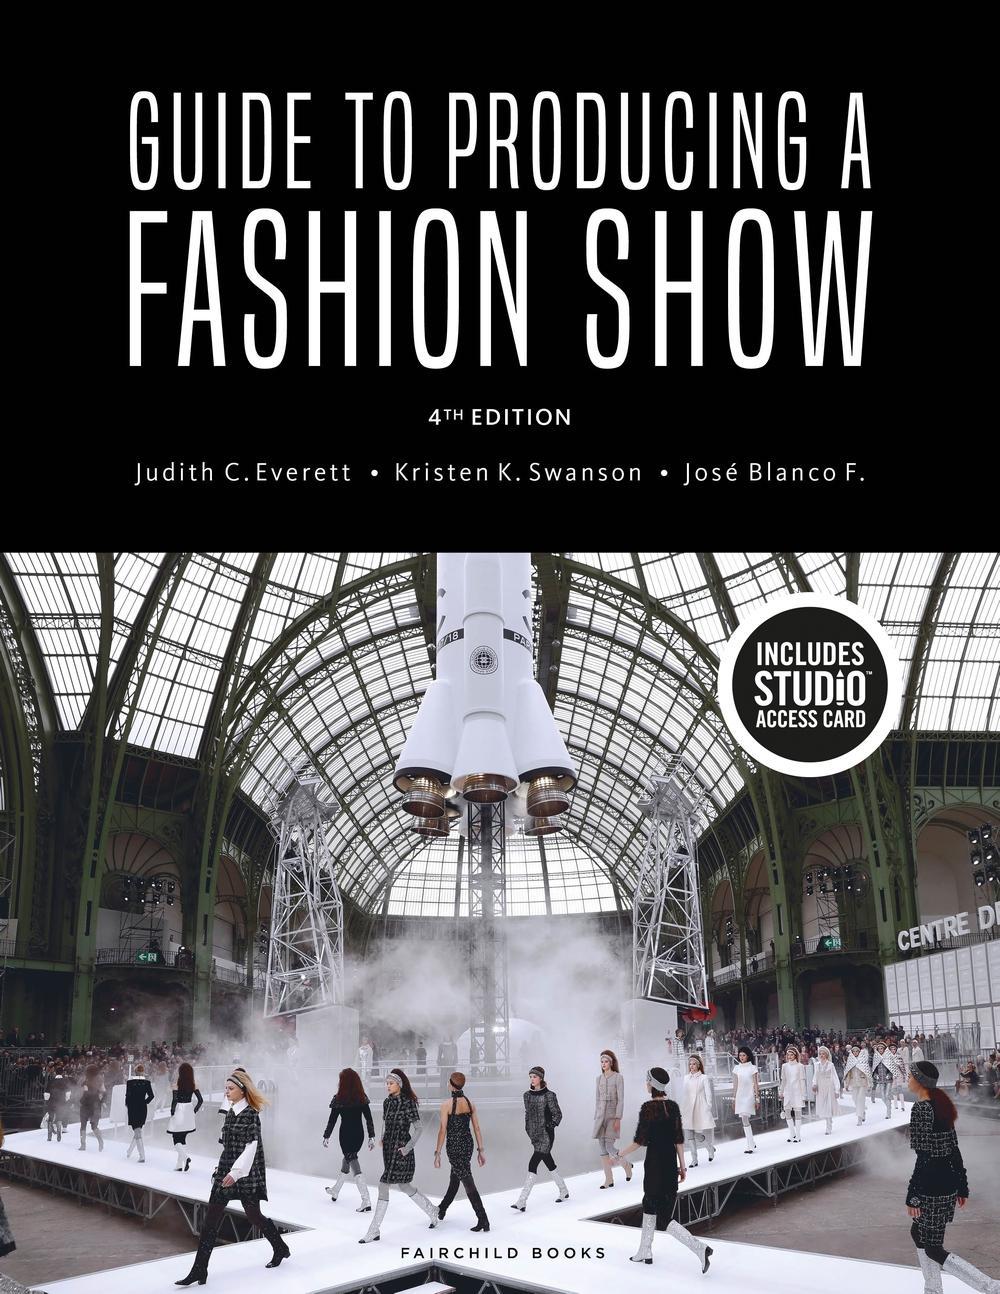 Guide to Producing a Fashion Show - Judith C Everett